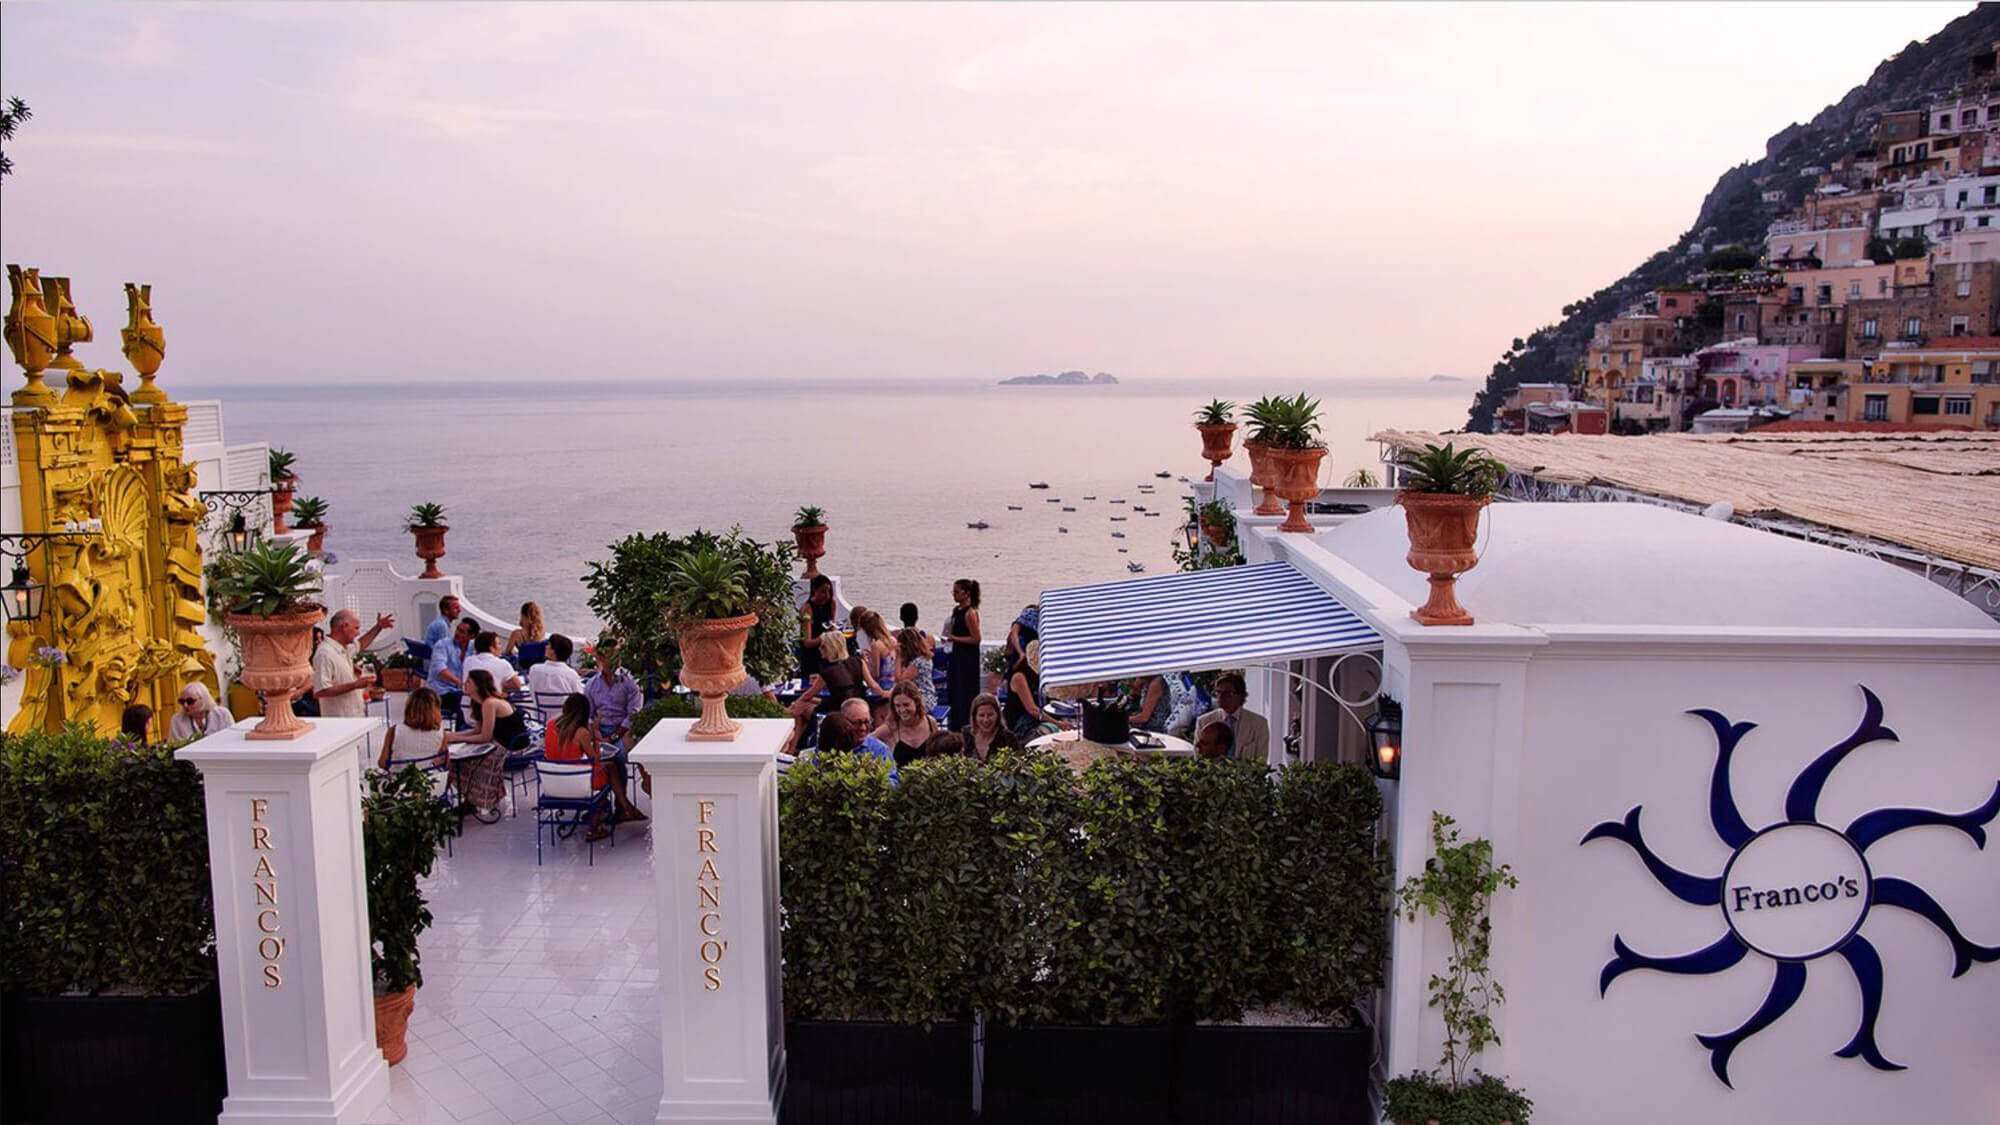 Franco’s Bar Positano is a beautiful bar with an old-fashioned, quality-first drinks menu and one of the best views in town!